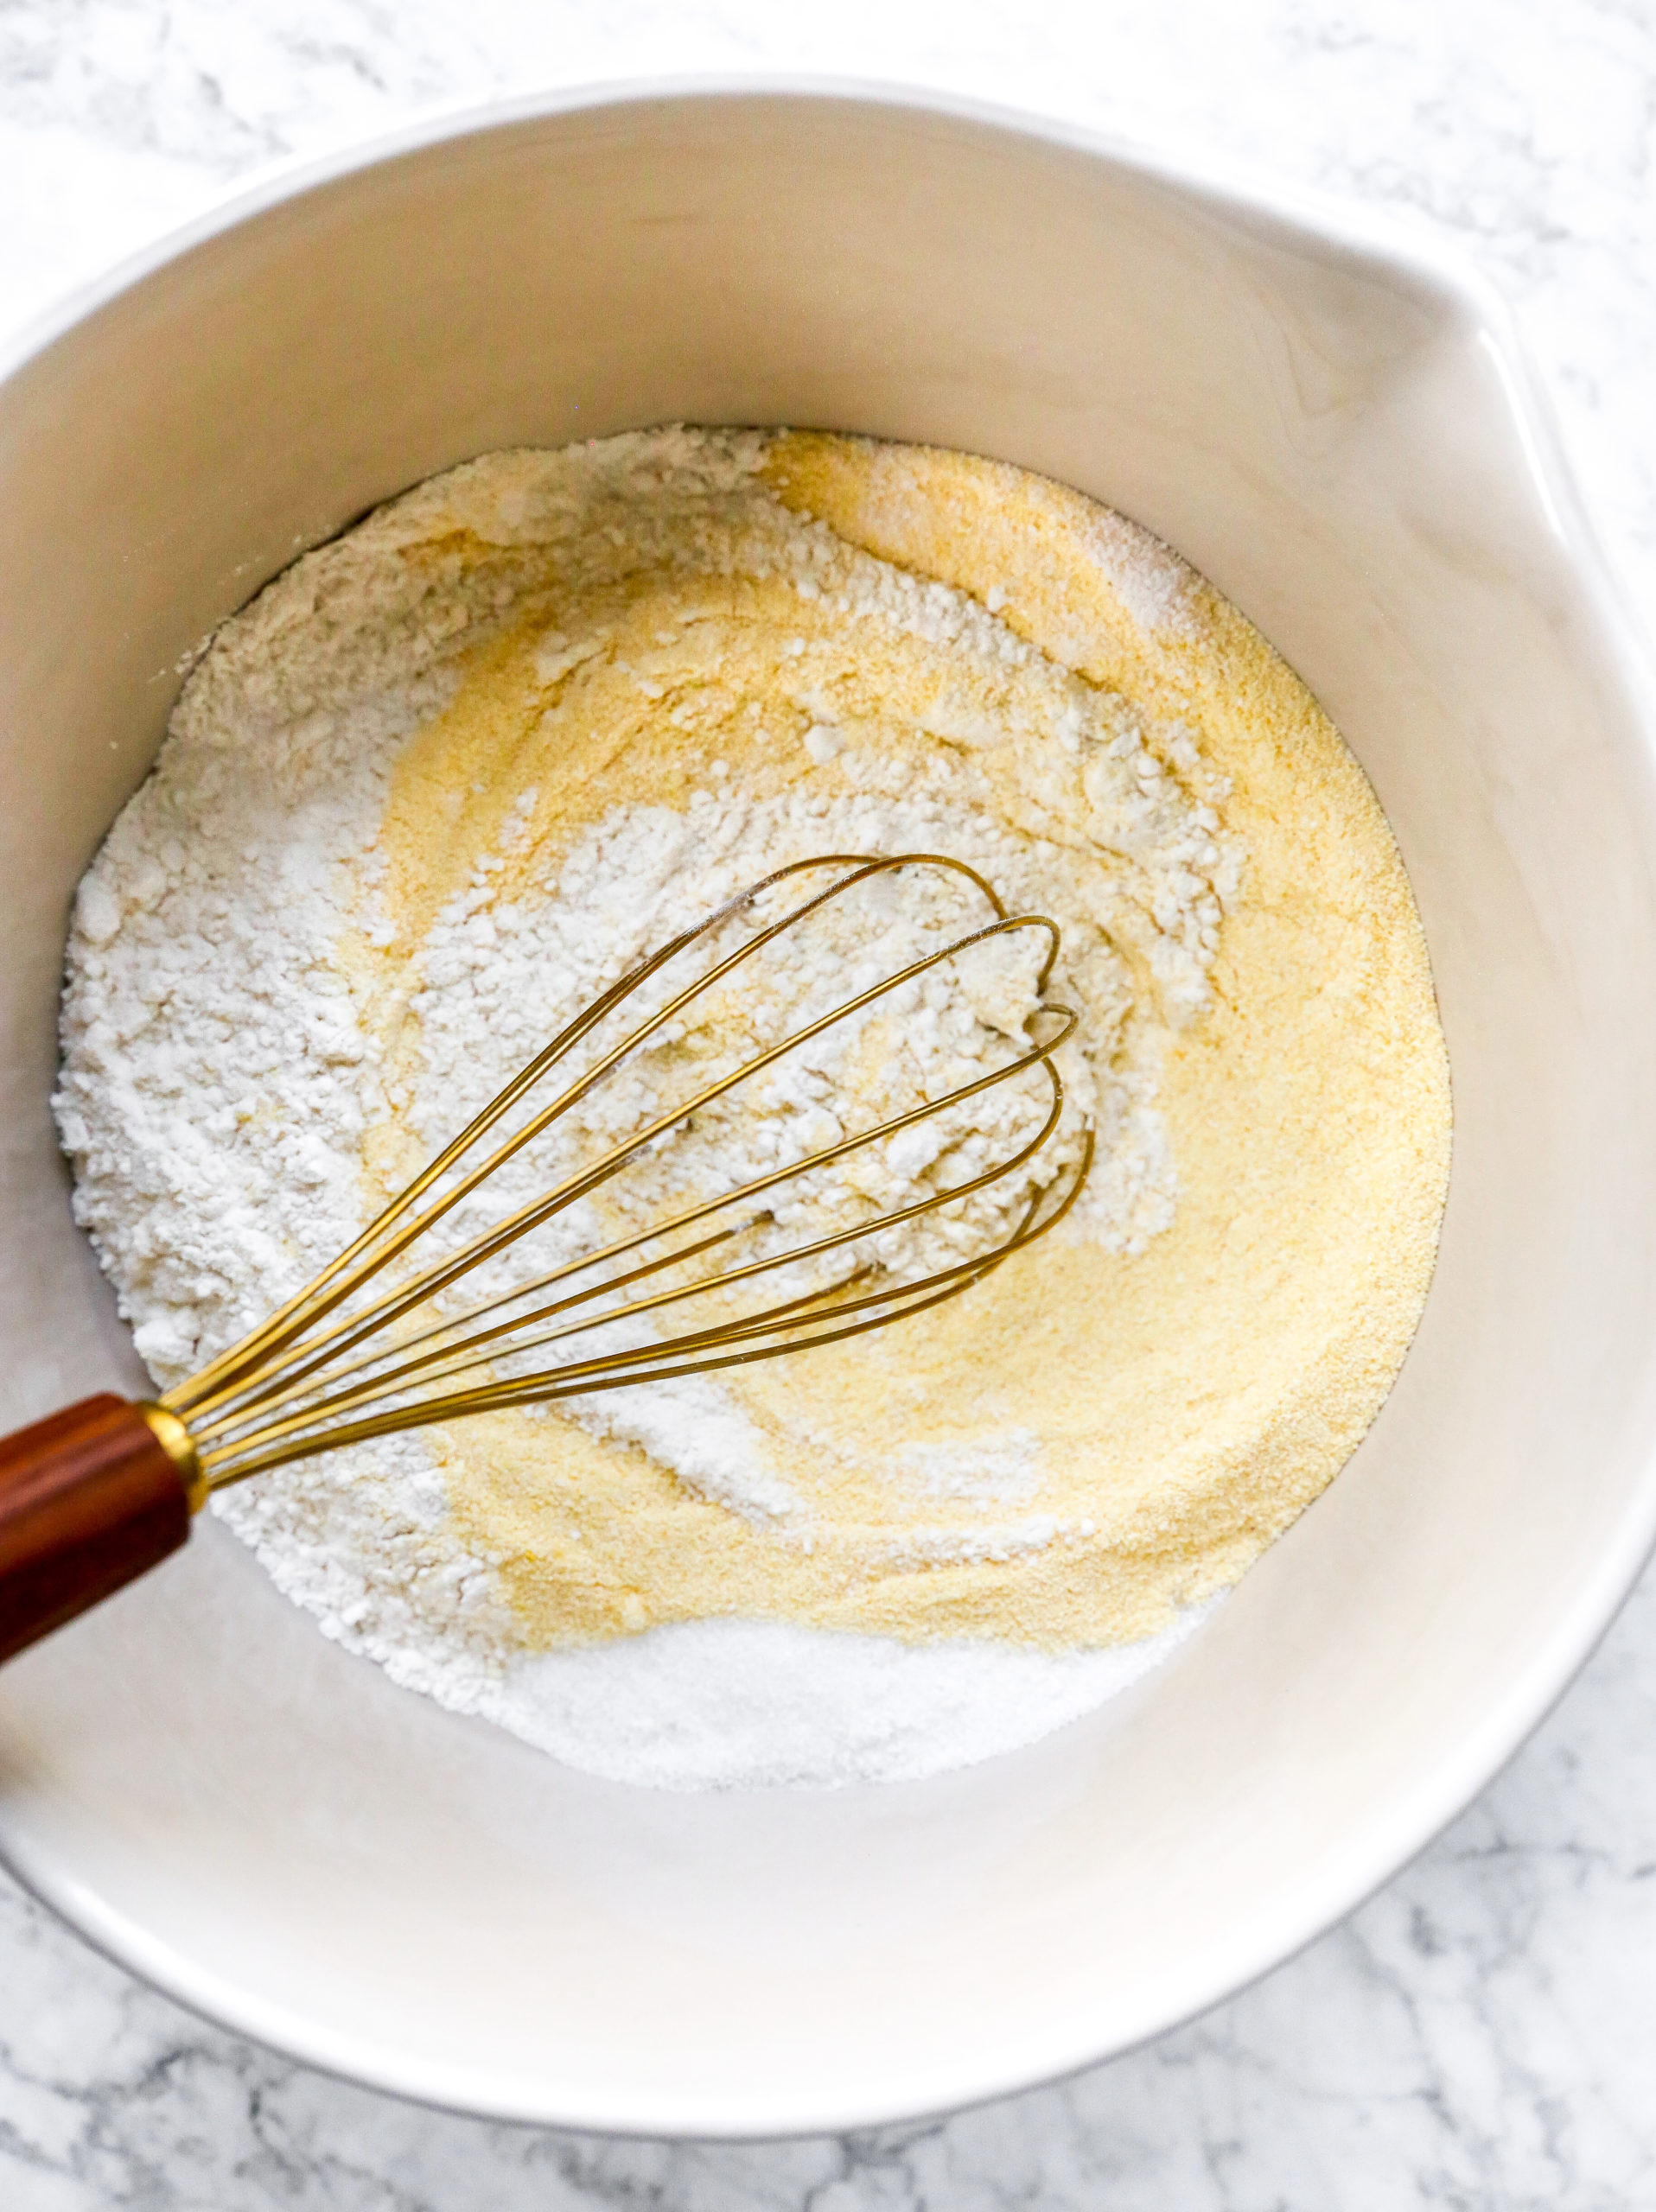 Whisking dry ingredients in a bowl.